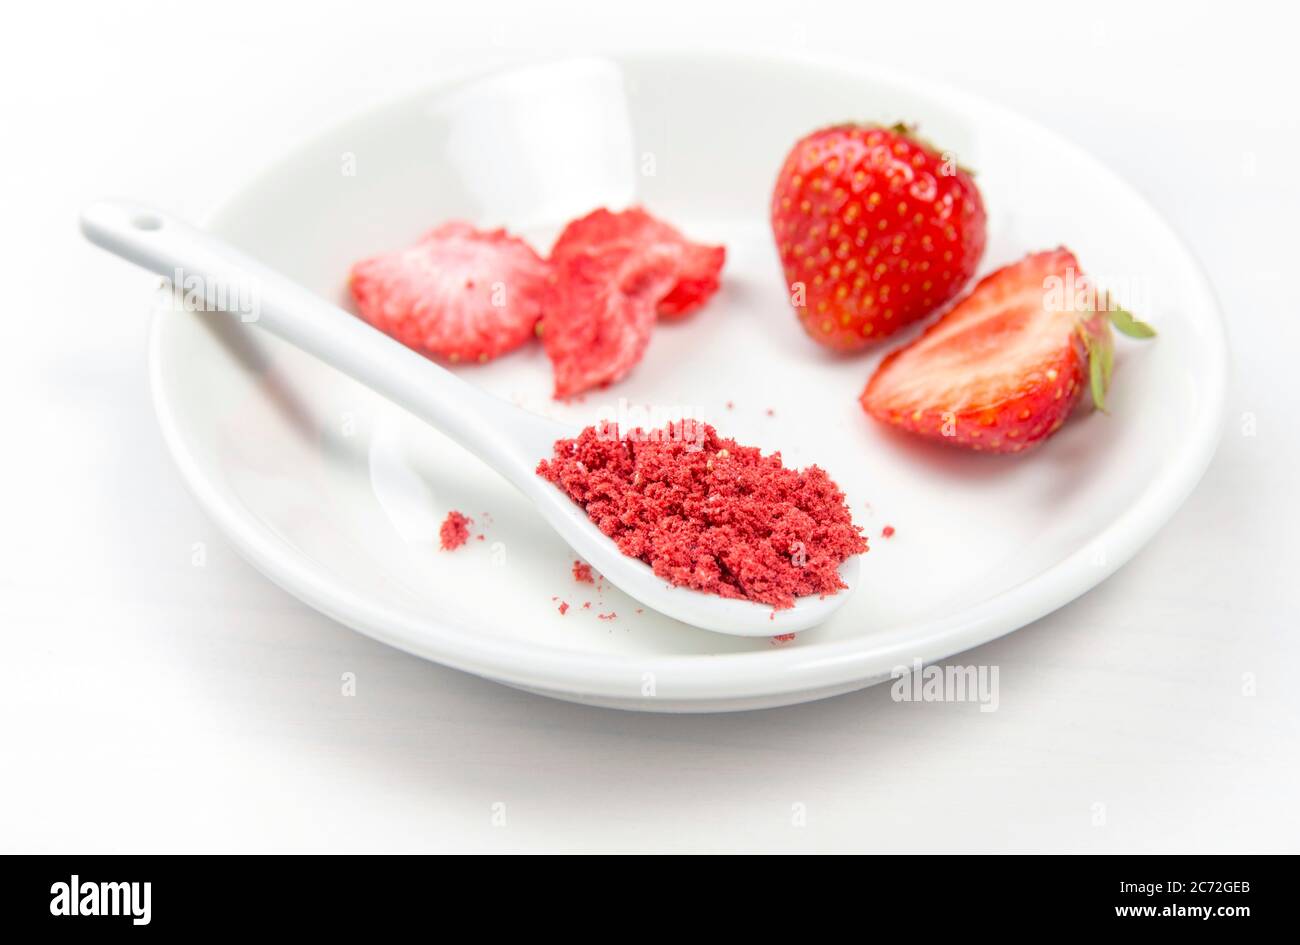 Strawberry powder made of freeze dried strawberries for sprinkle. Flavor and color ingredient for food. Top view, white minimal background, copy space Stock Photo